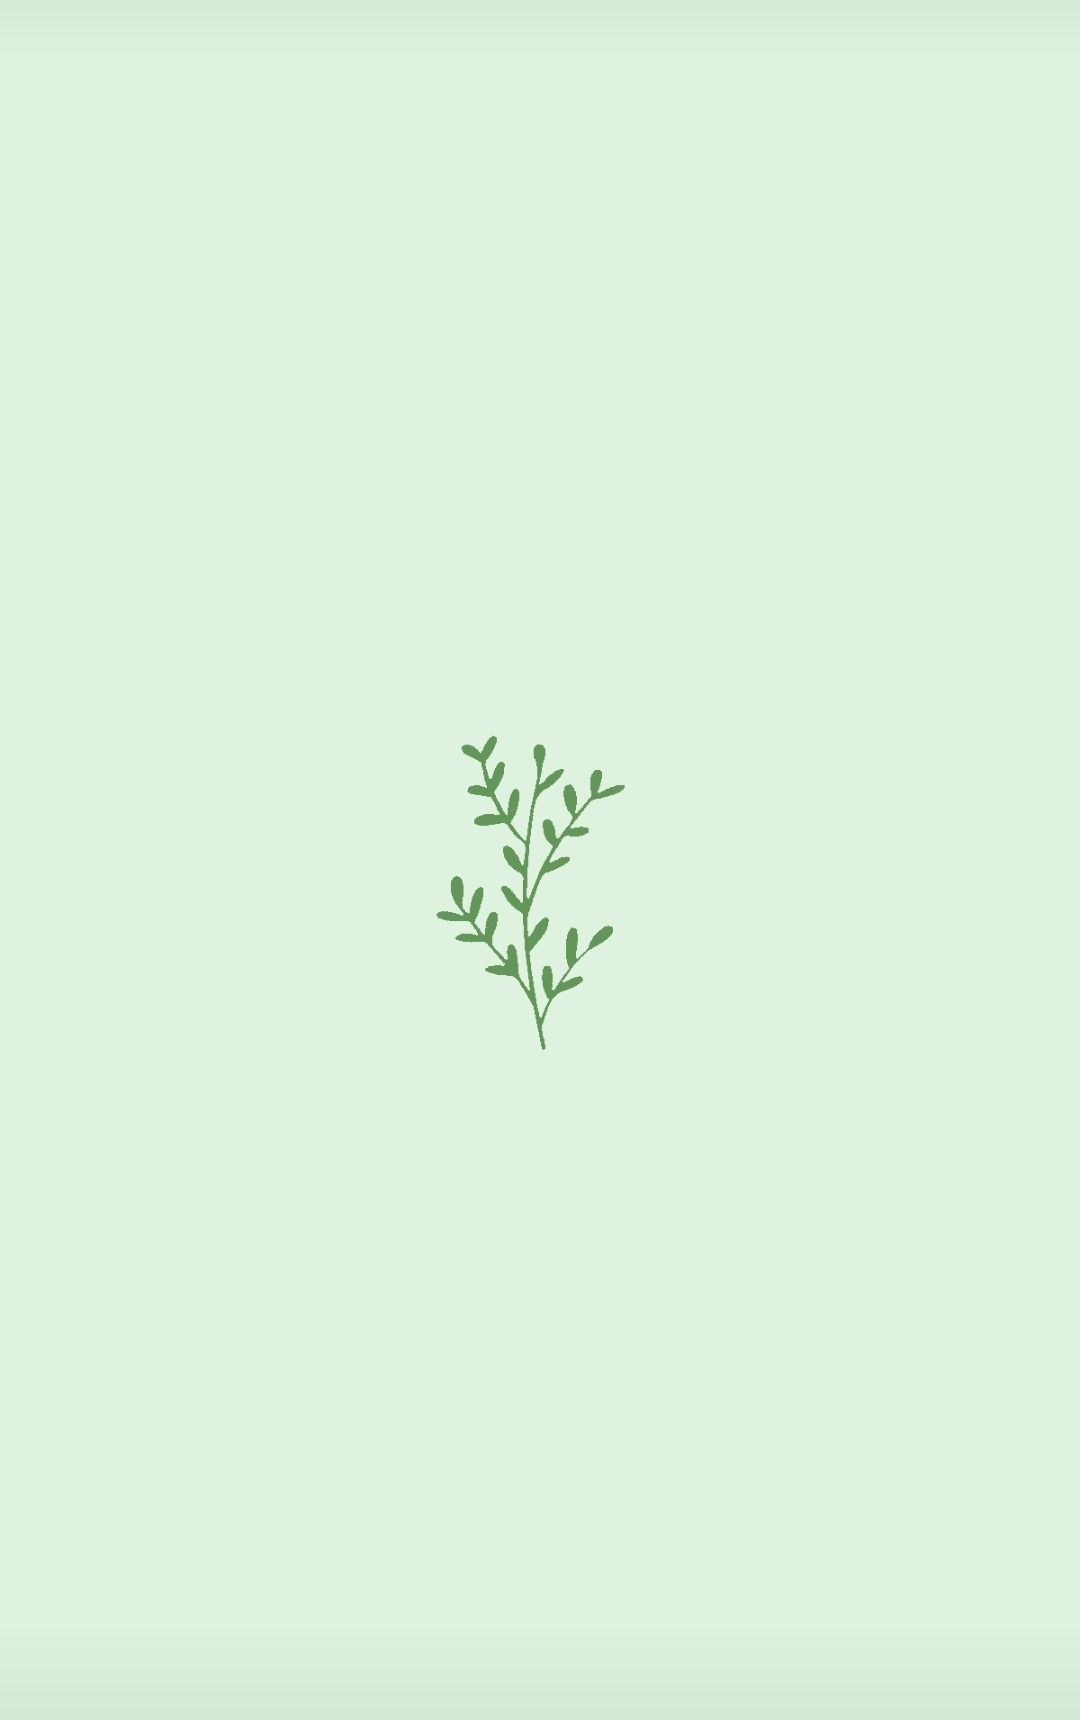 A green leaf on top of white background - Green, minimalist, pastel green, simple